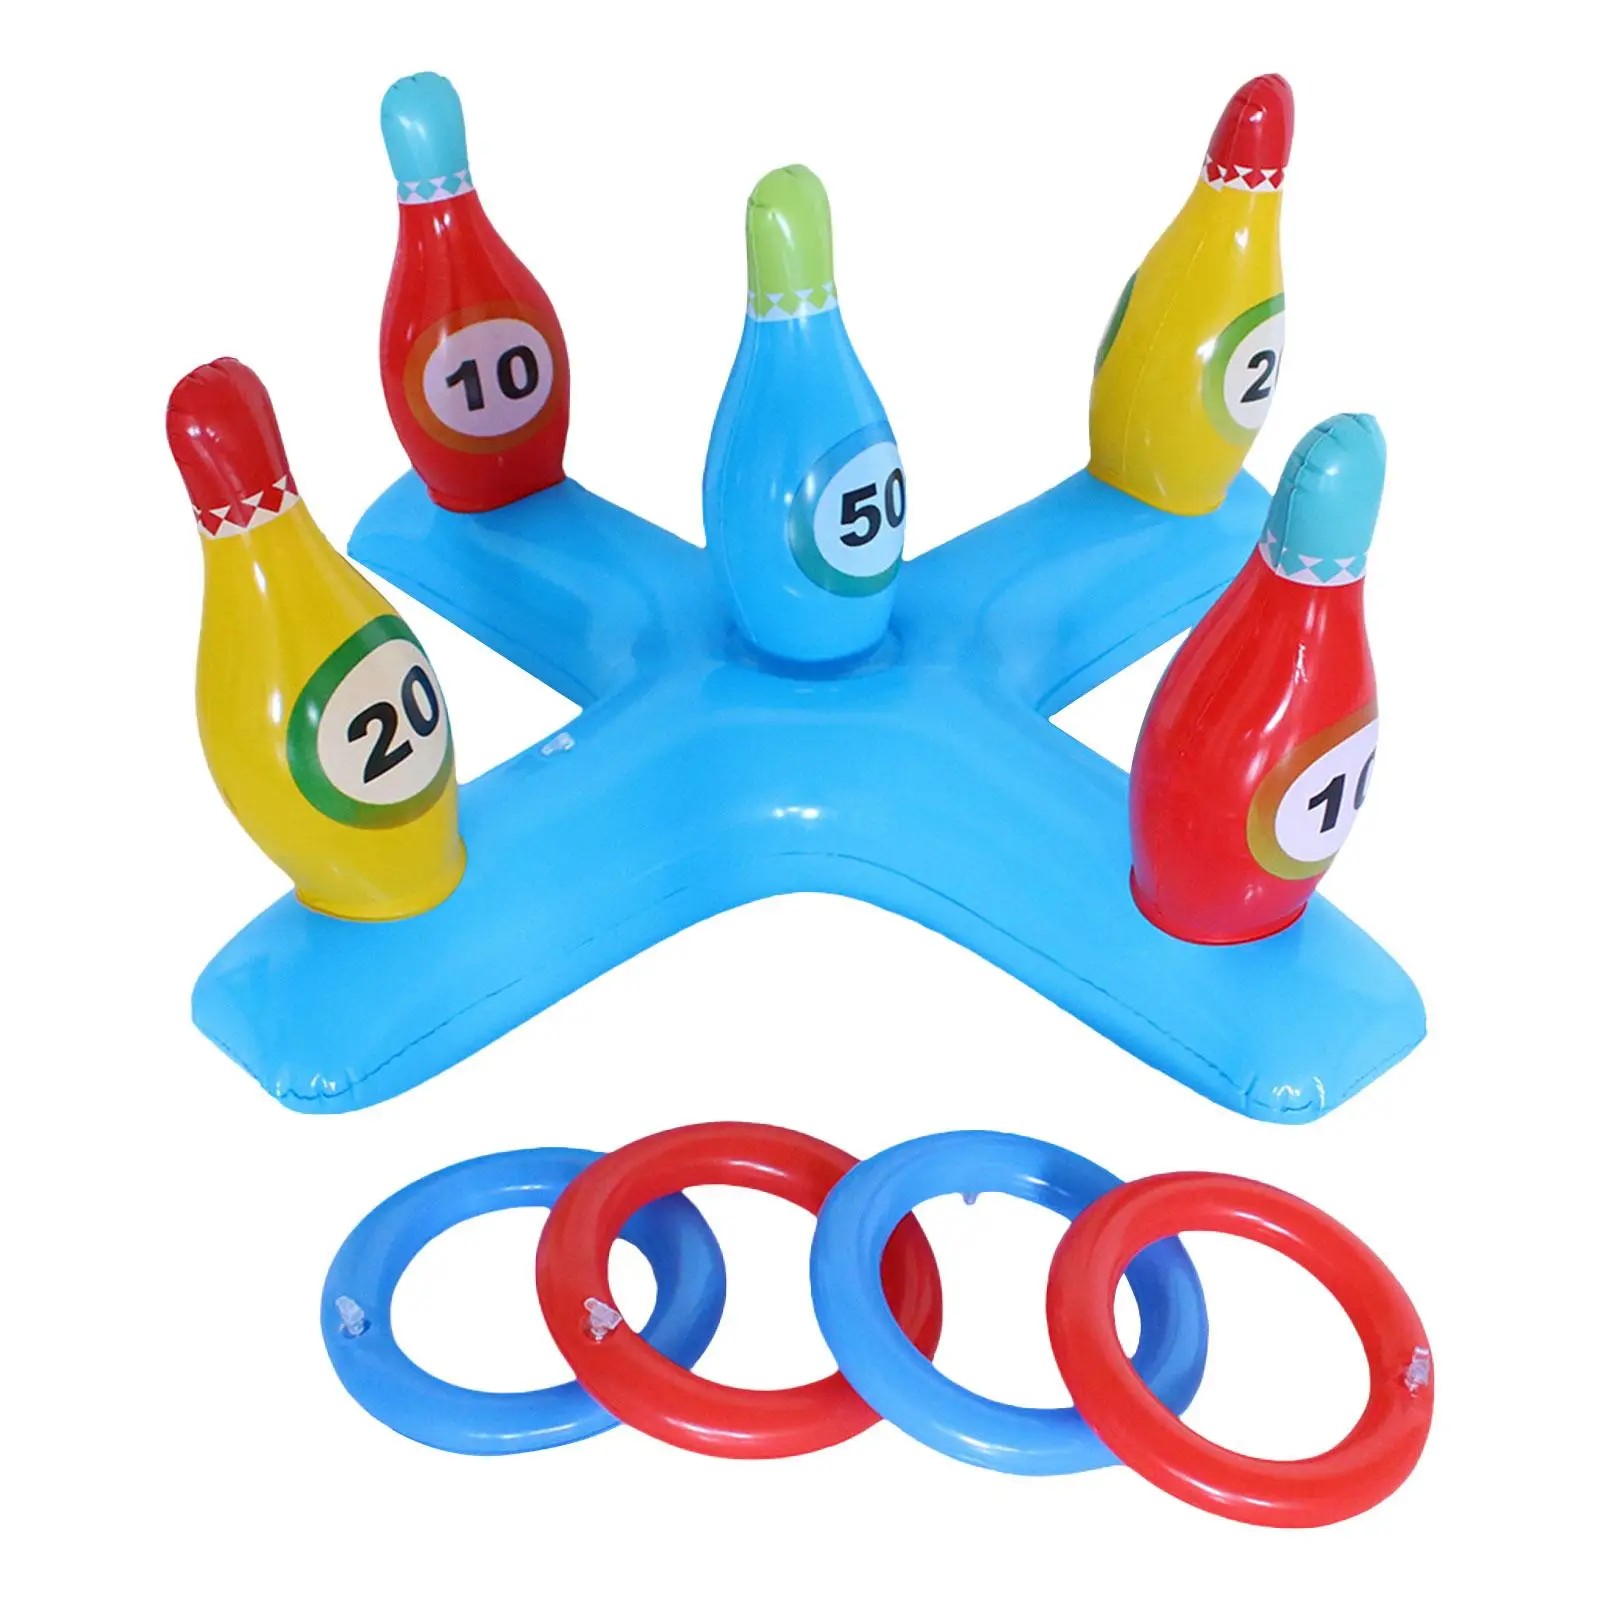 Ring Toss Game Set Team Cooperation Inflatable Bowling Set Carnival Outdoor Games for Games Xmas Activity Backyard Birthday